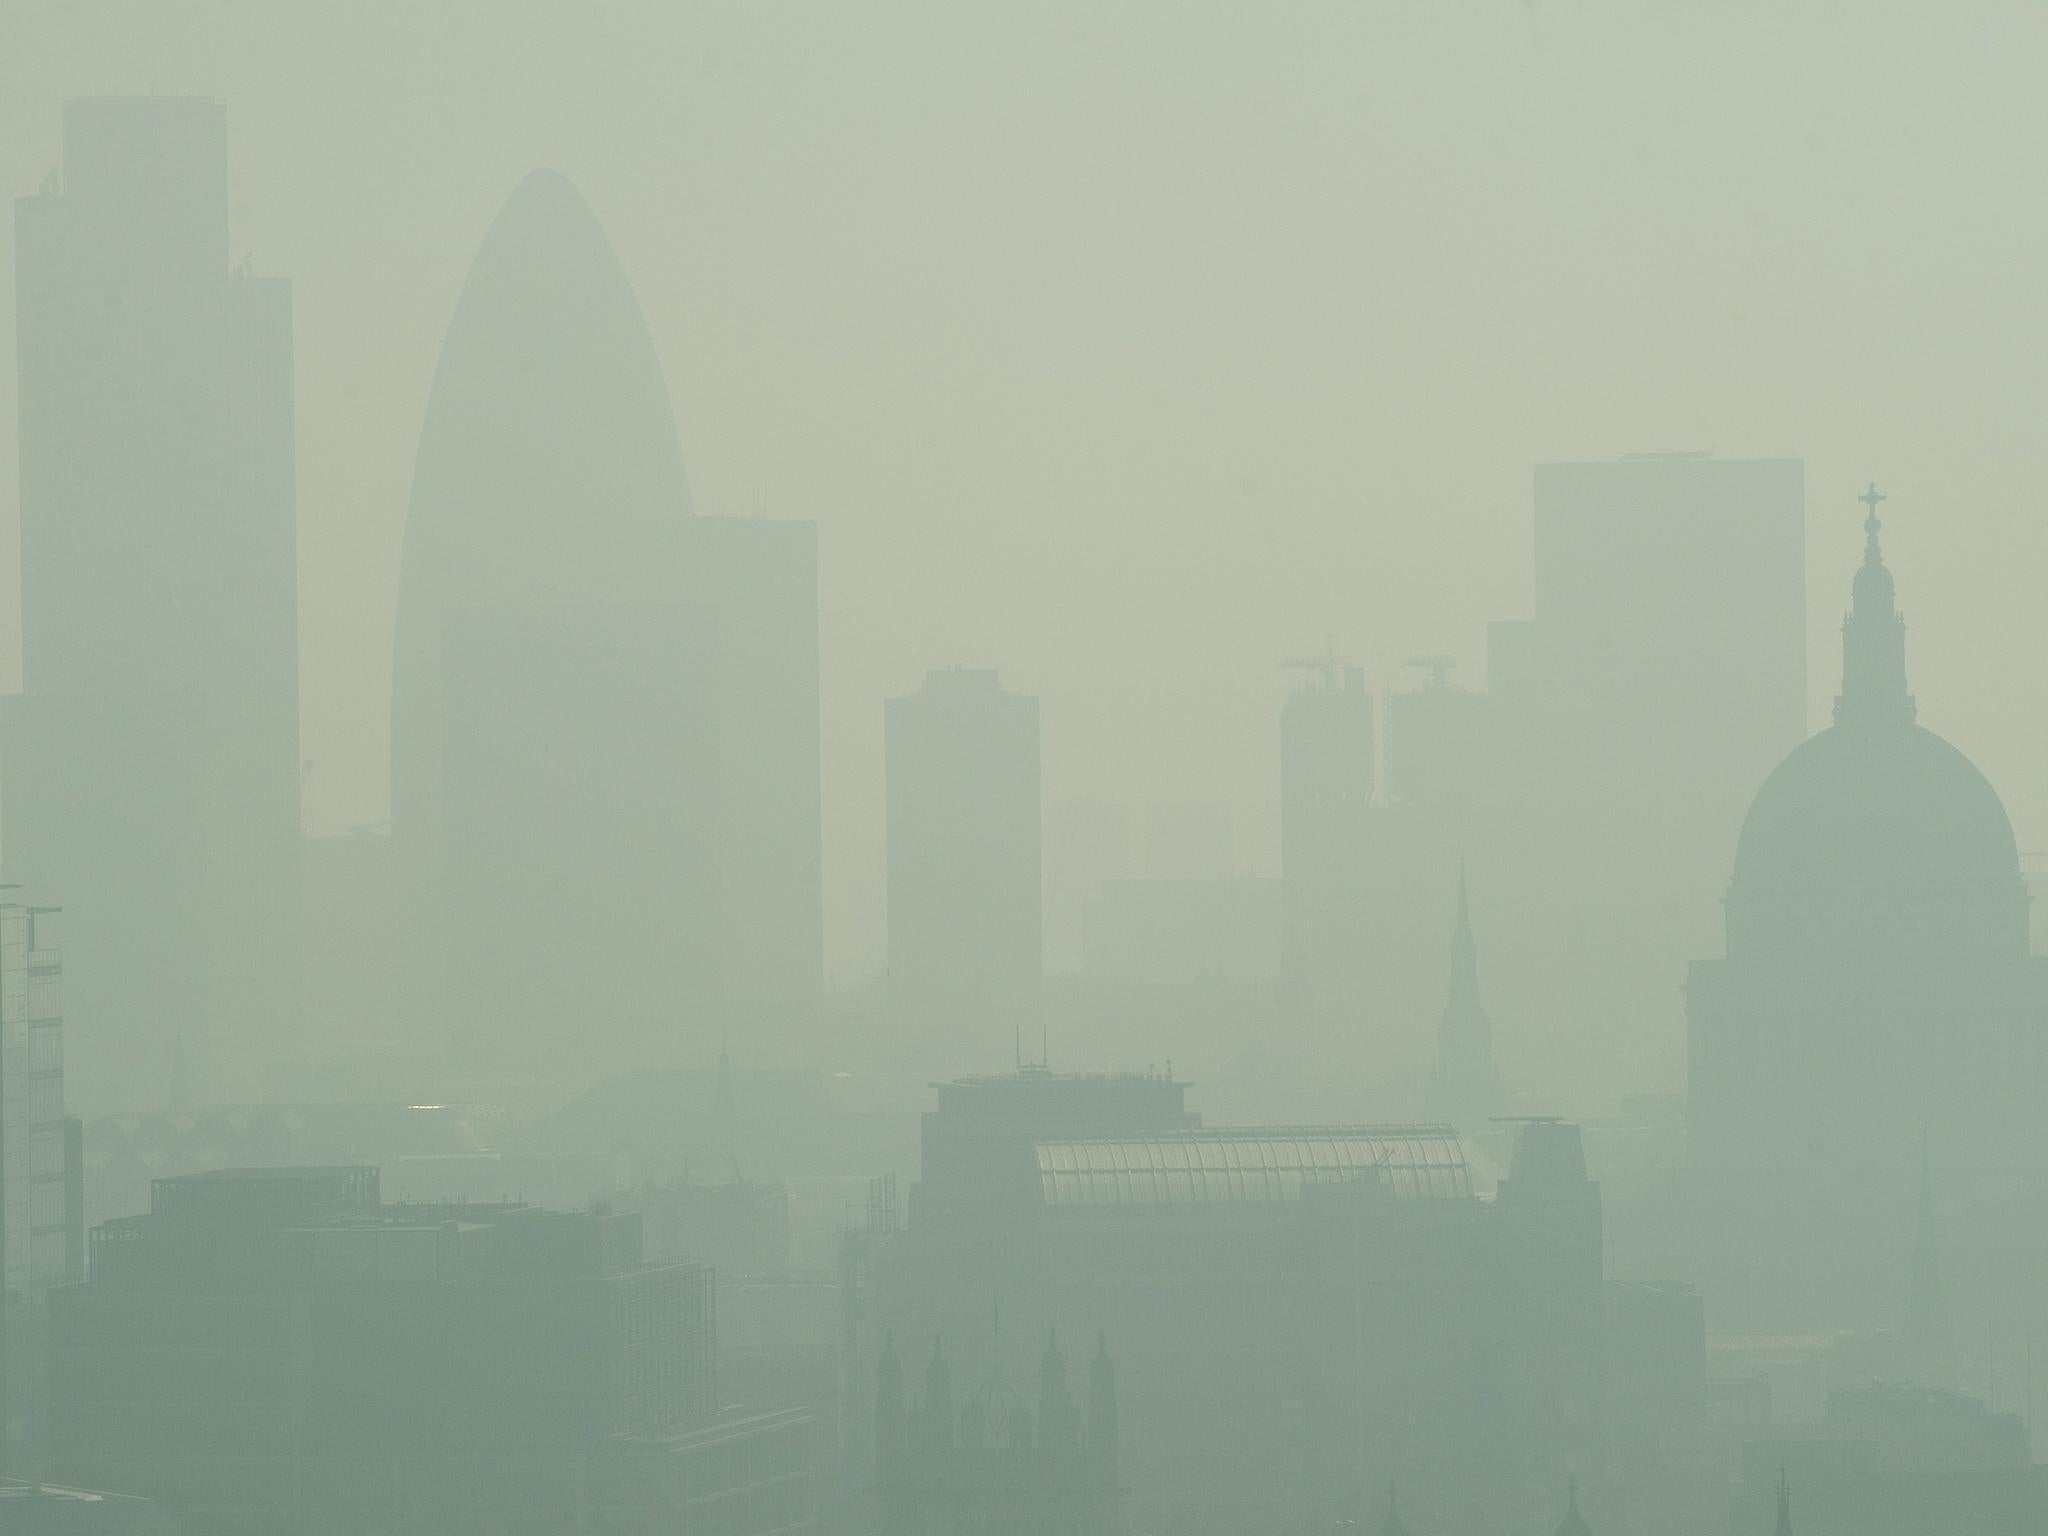 London is barely visible through the smog